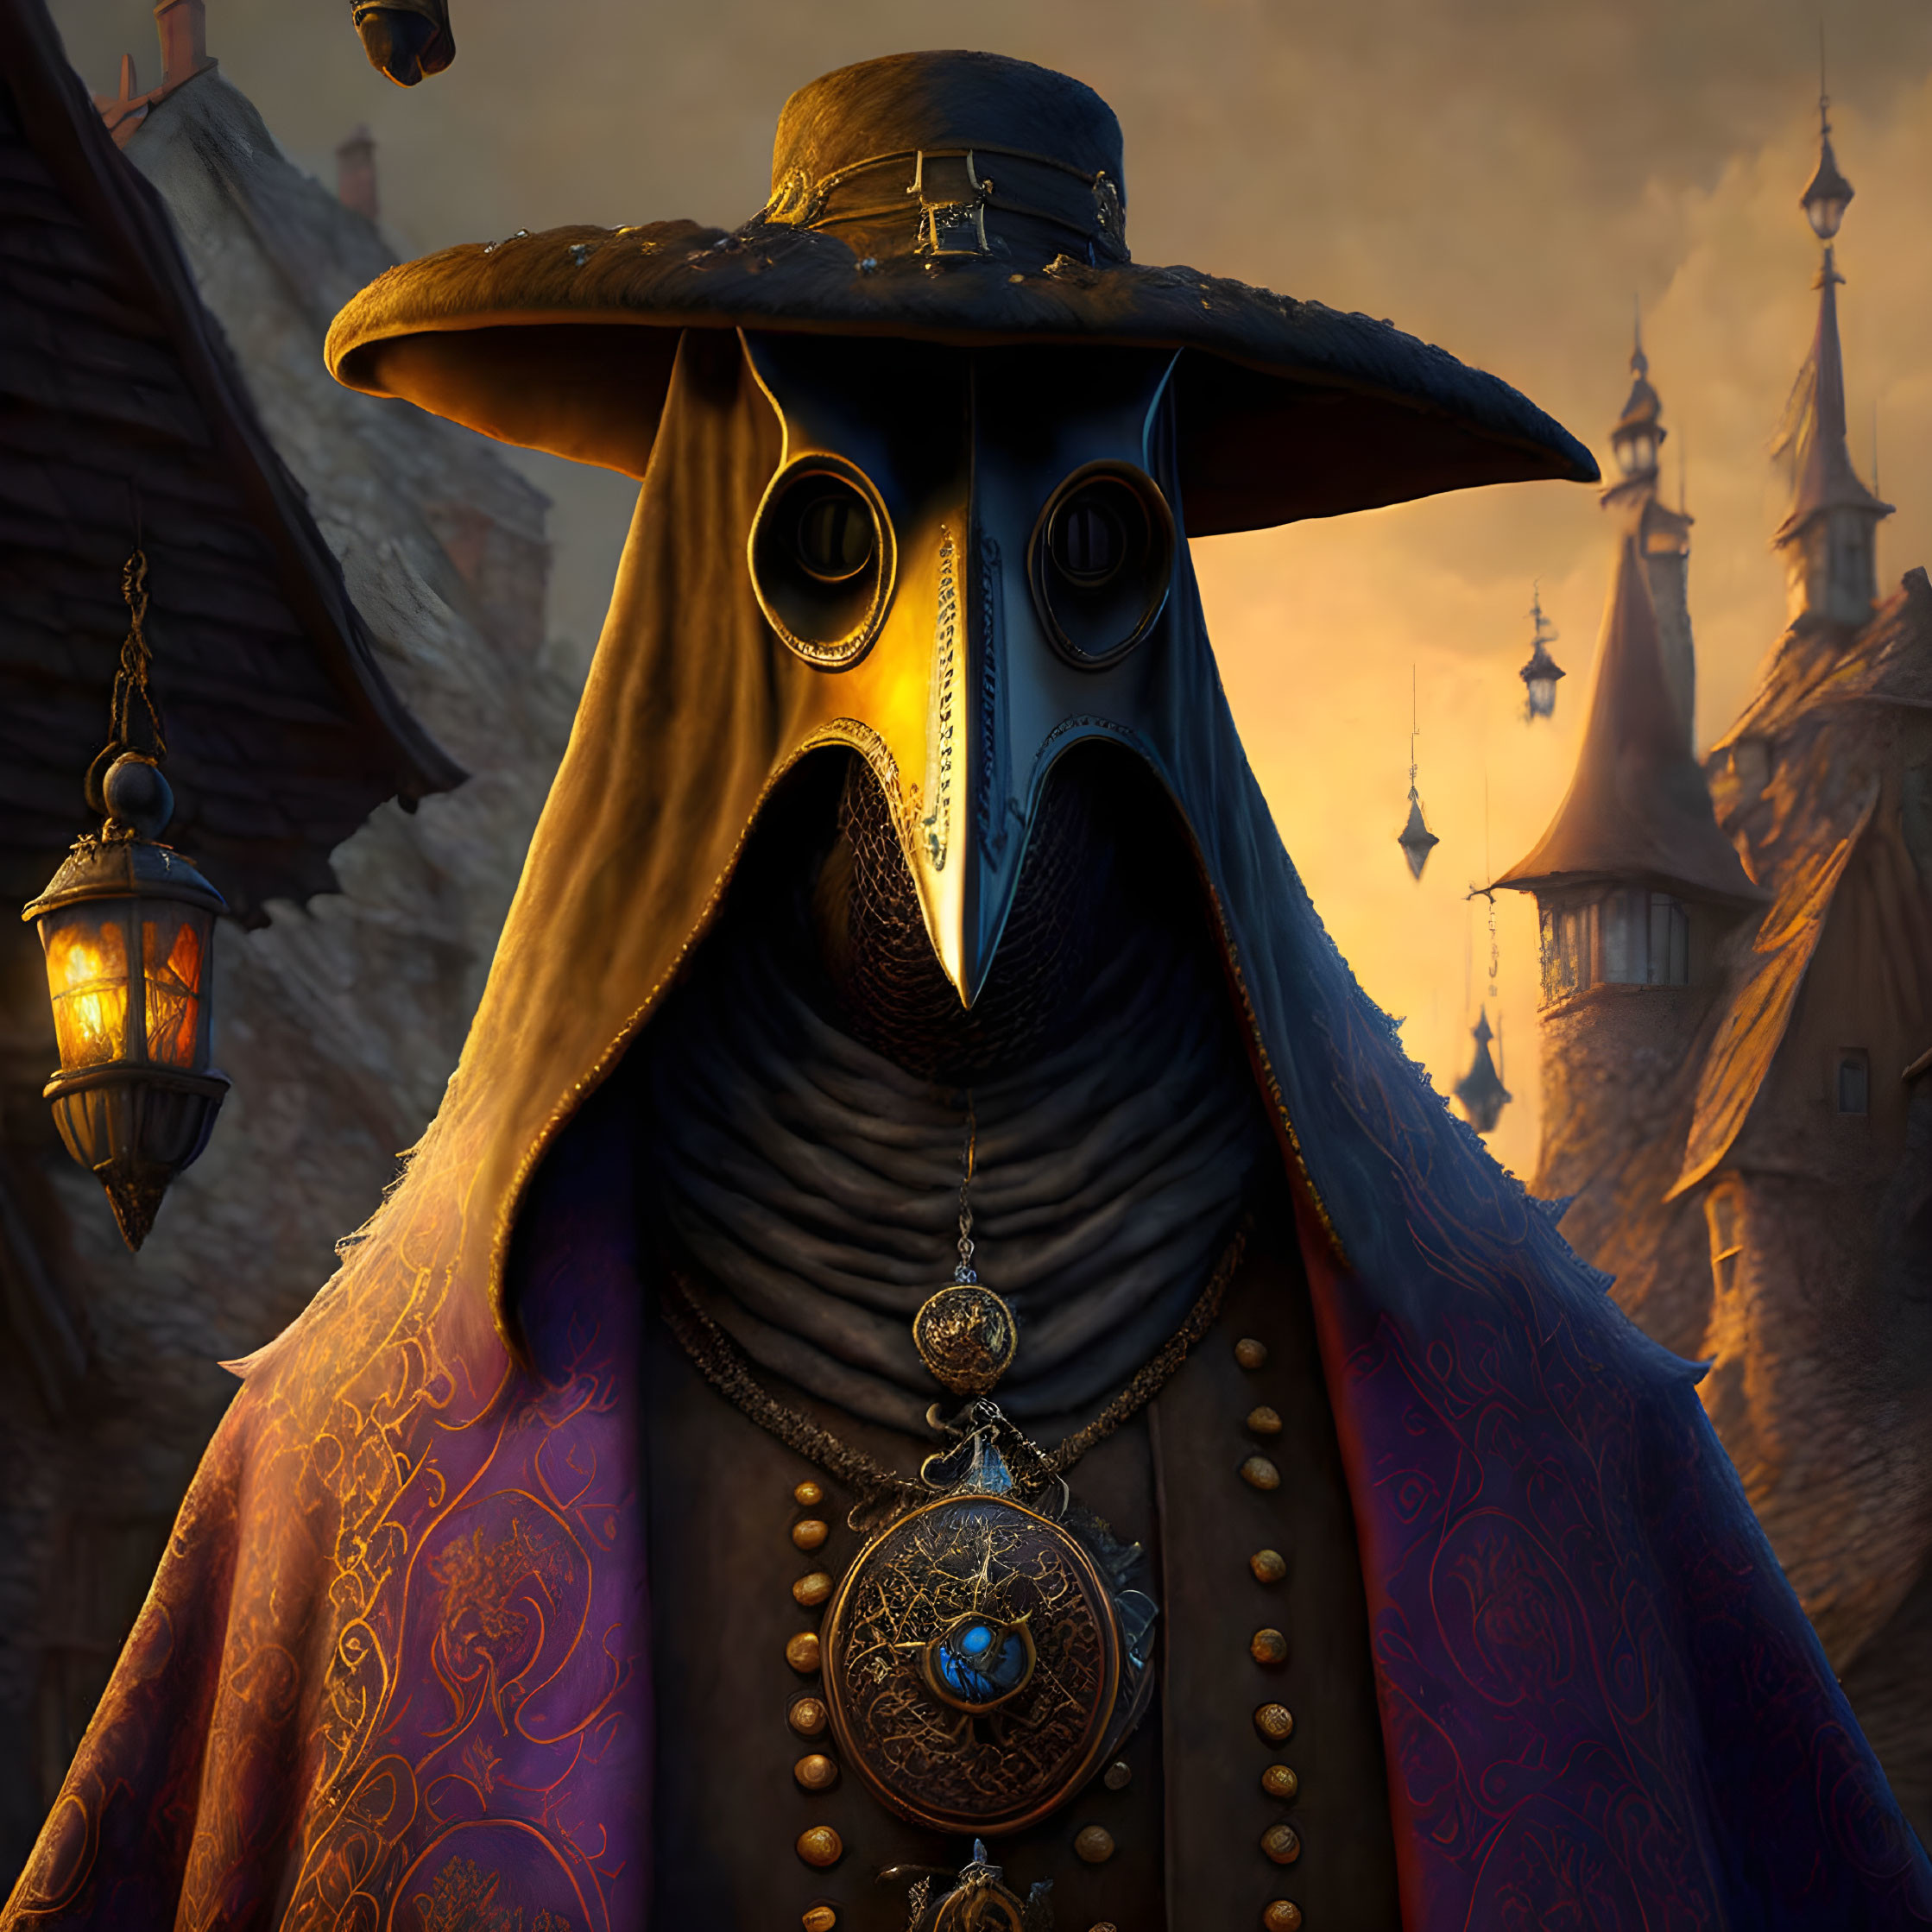 Detailed Artwork: Character in Plague Doctor Mask with Ornate Cloak & Medieval Setting